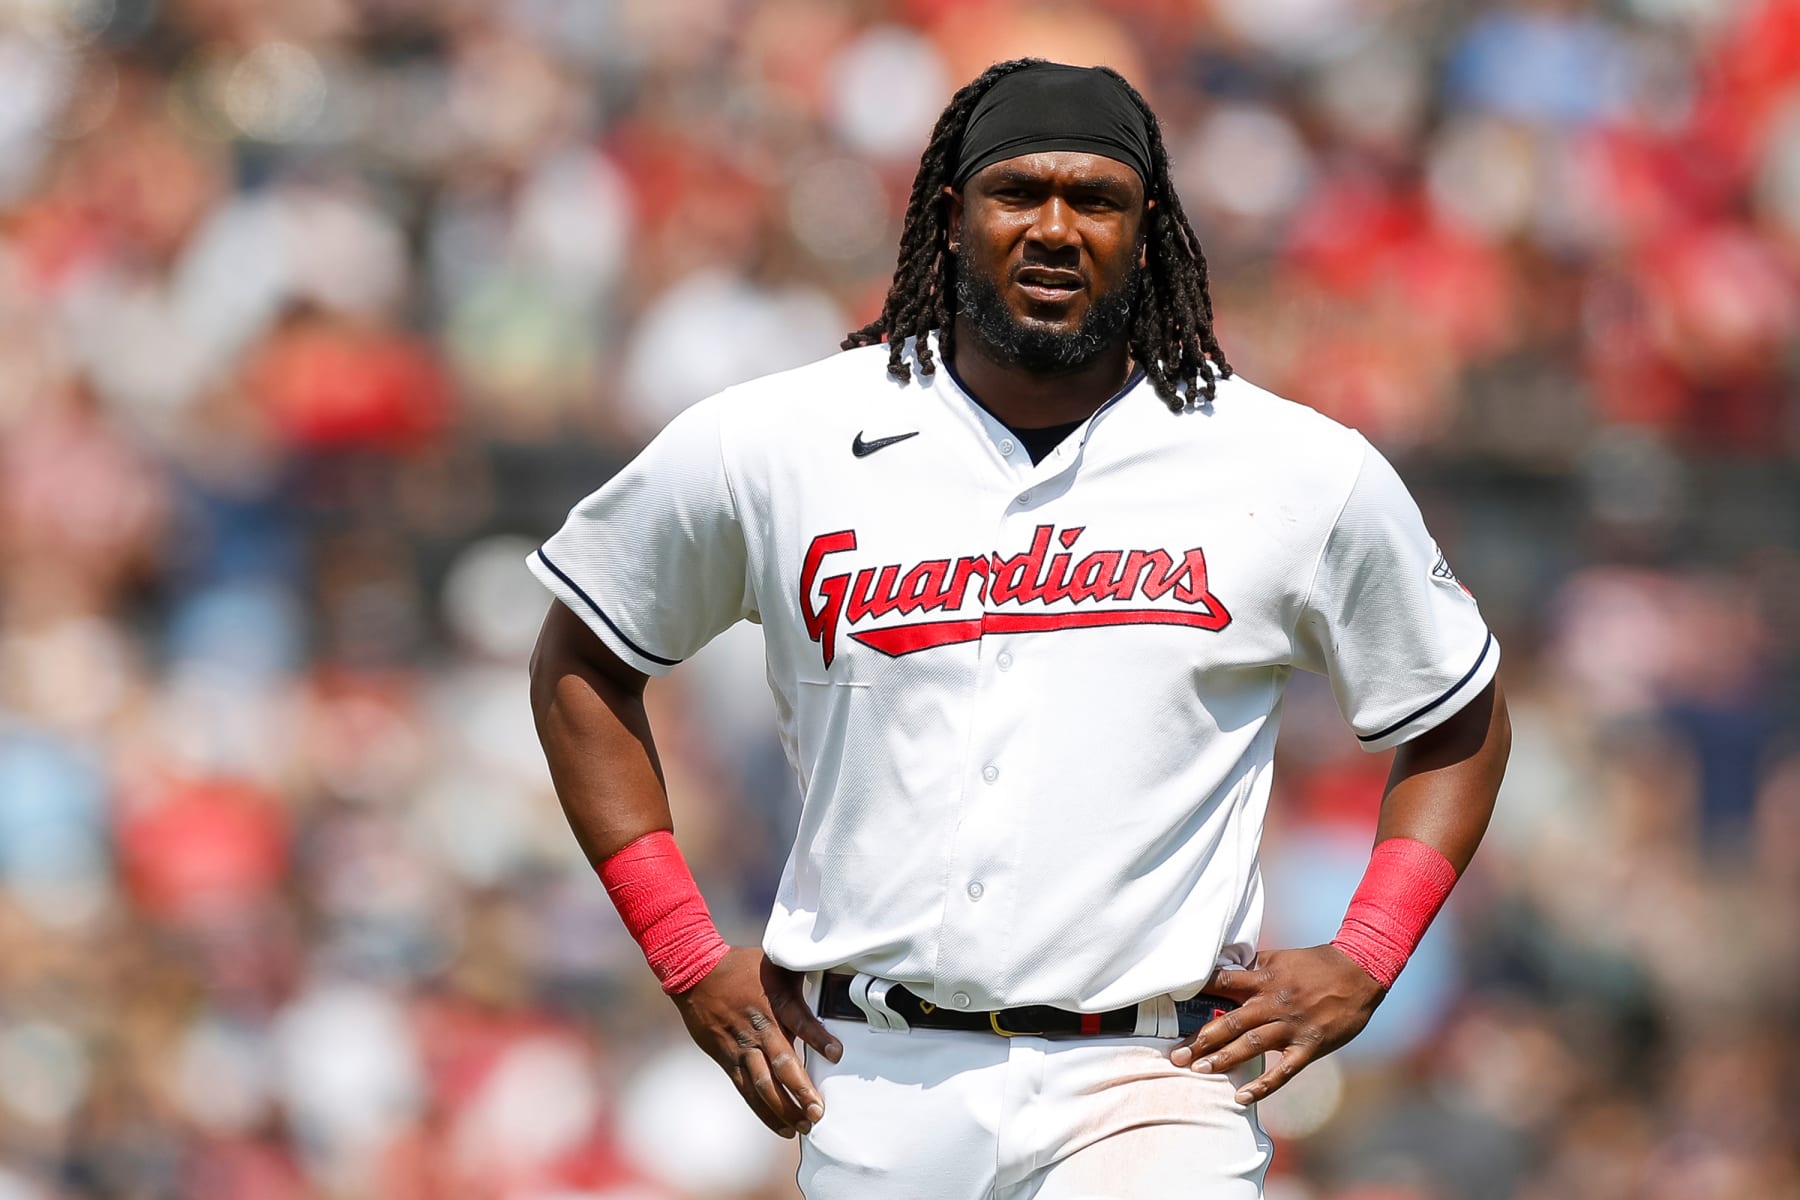 MLB on X: The Marlins have reportedly acquired 1B Josh Bell from